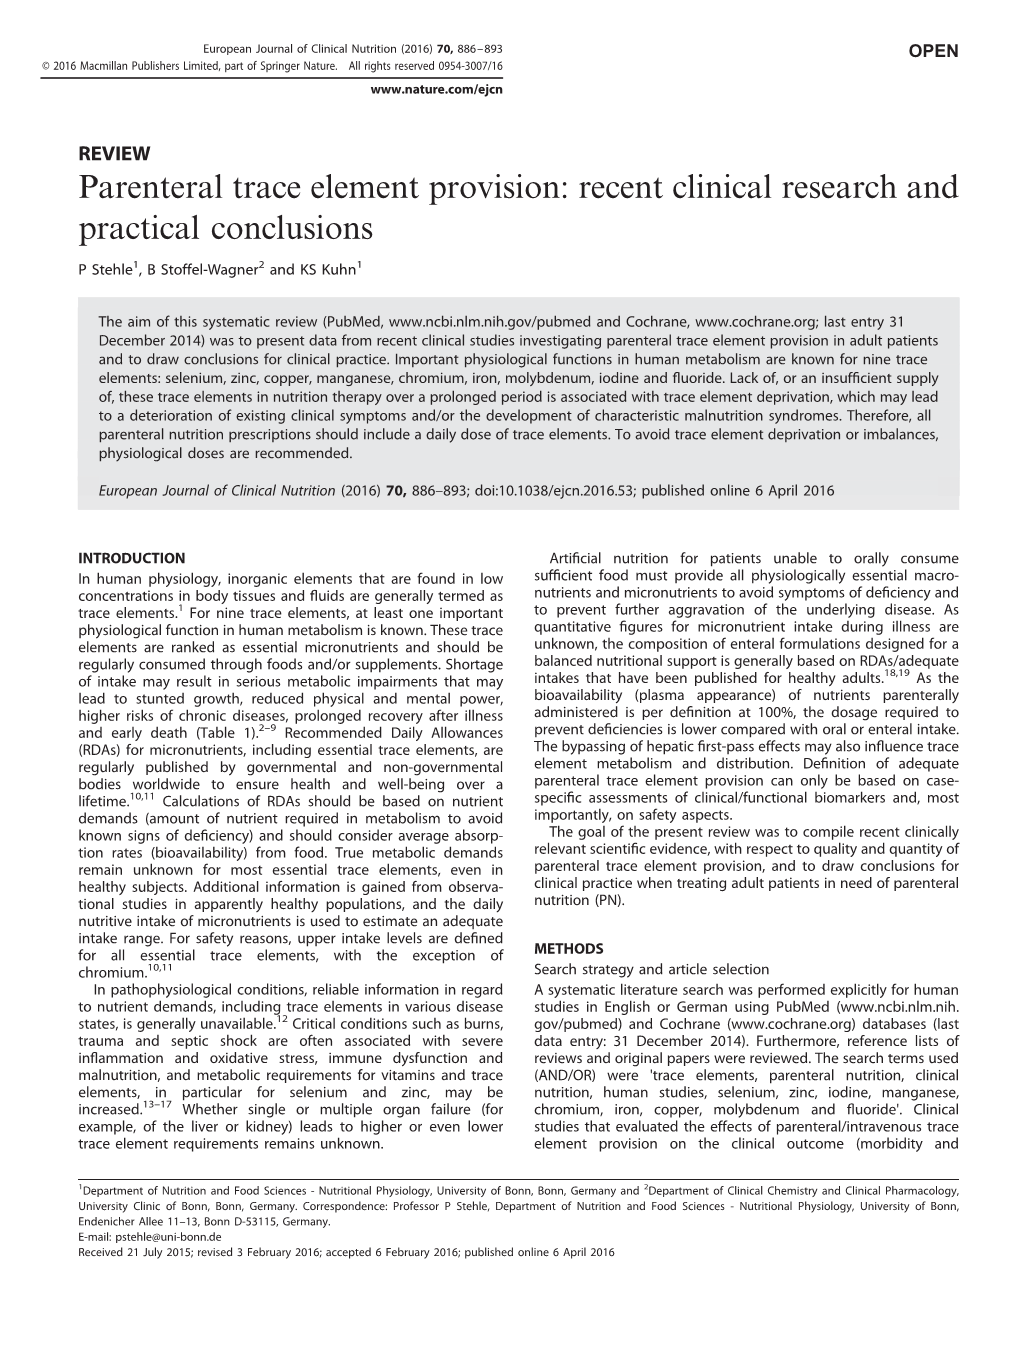 Parenteral Trace Element Provision: Recent Clinical Research and Practical Conclusions